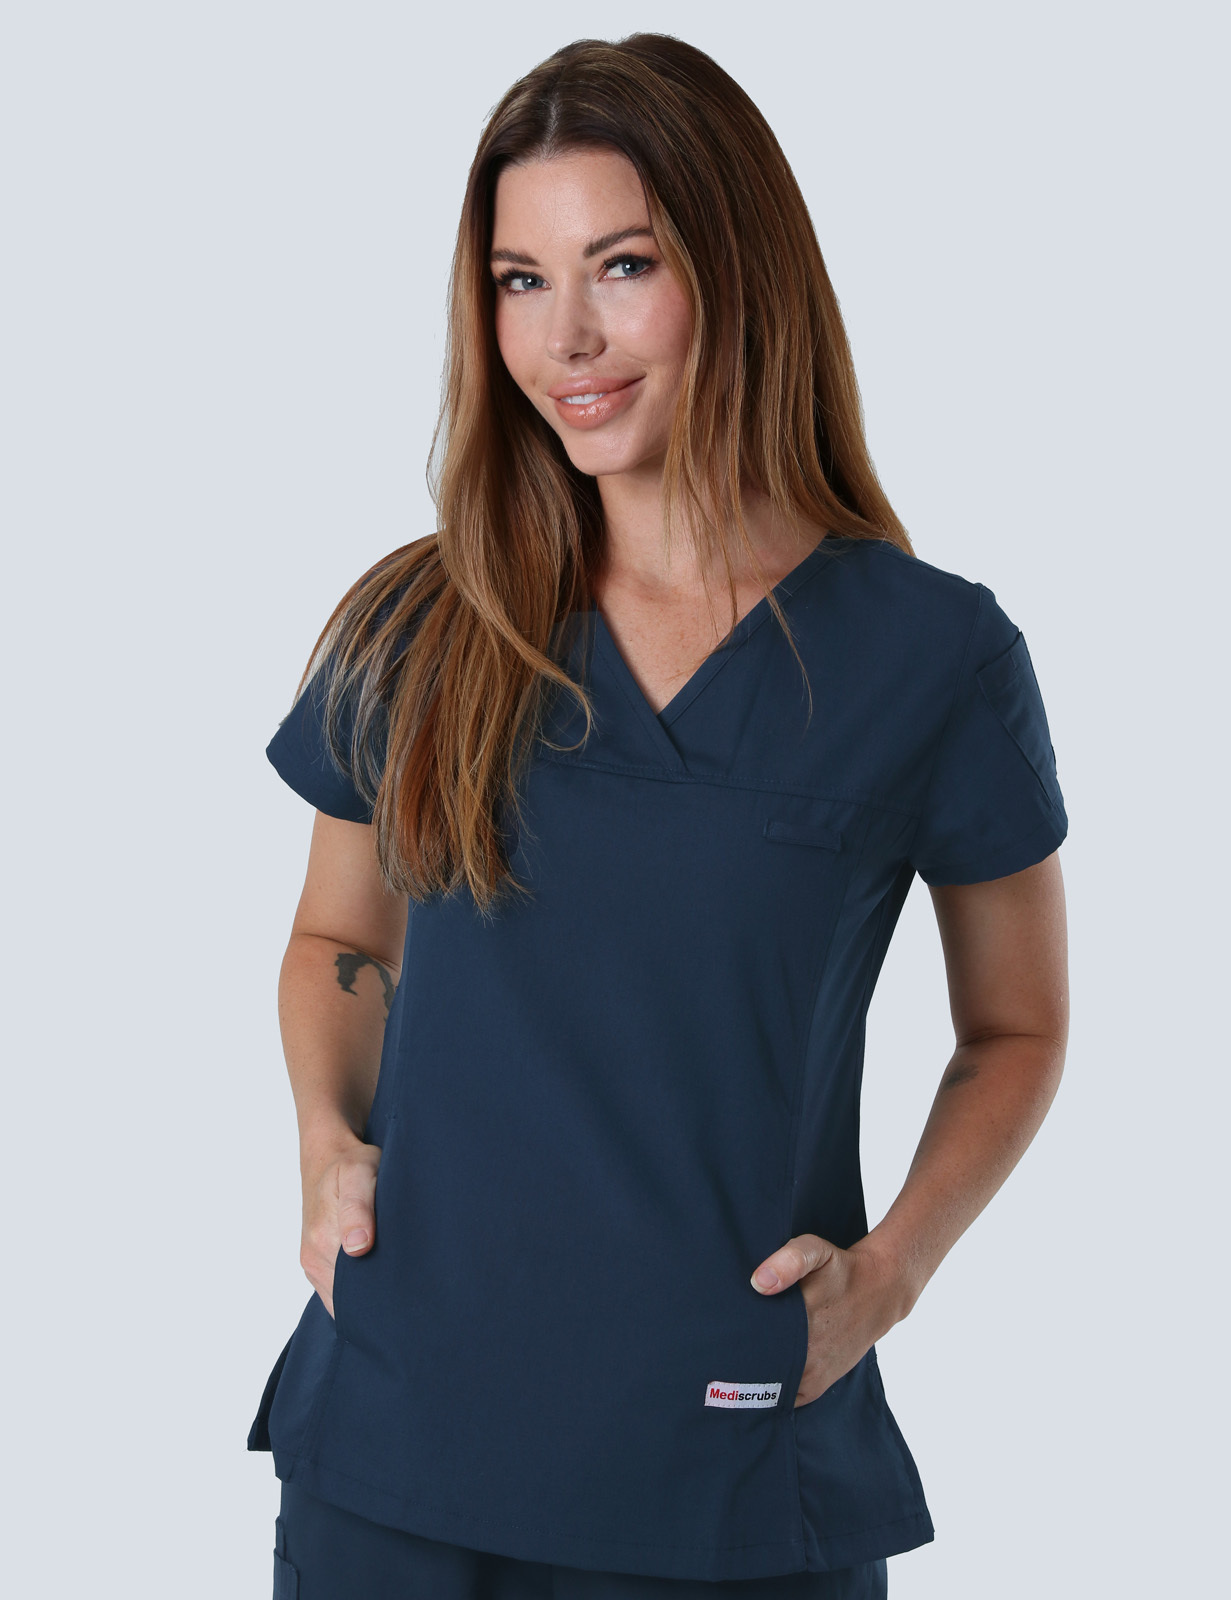 Peninsula Health Frankston - ICU ANUM (Women's Fit Solid Scrub Top and Cargo Pants in Navy incl Logos)